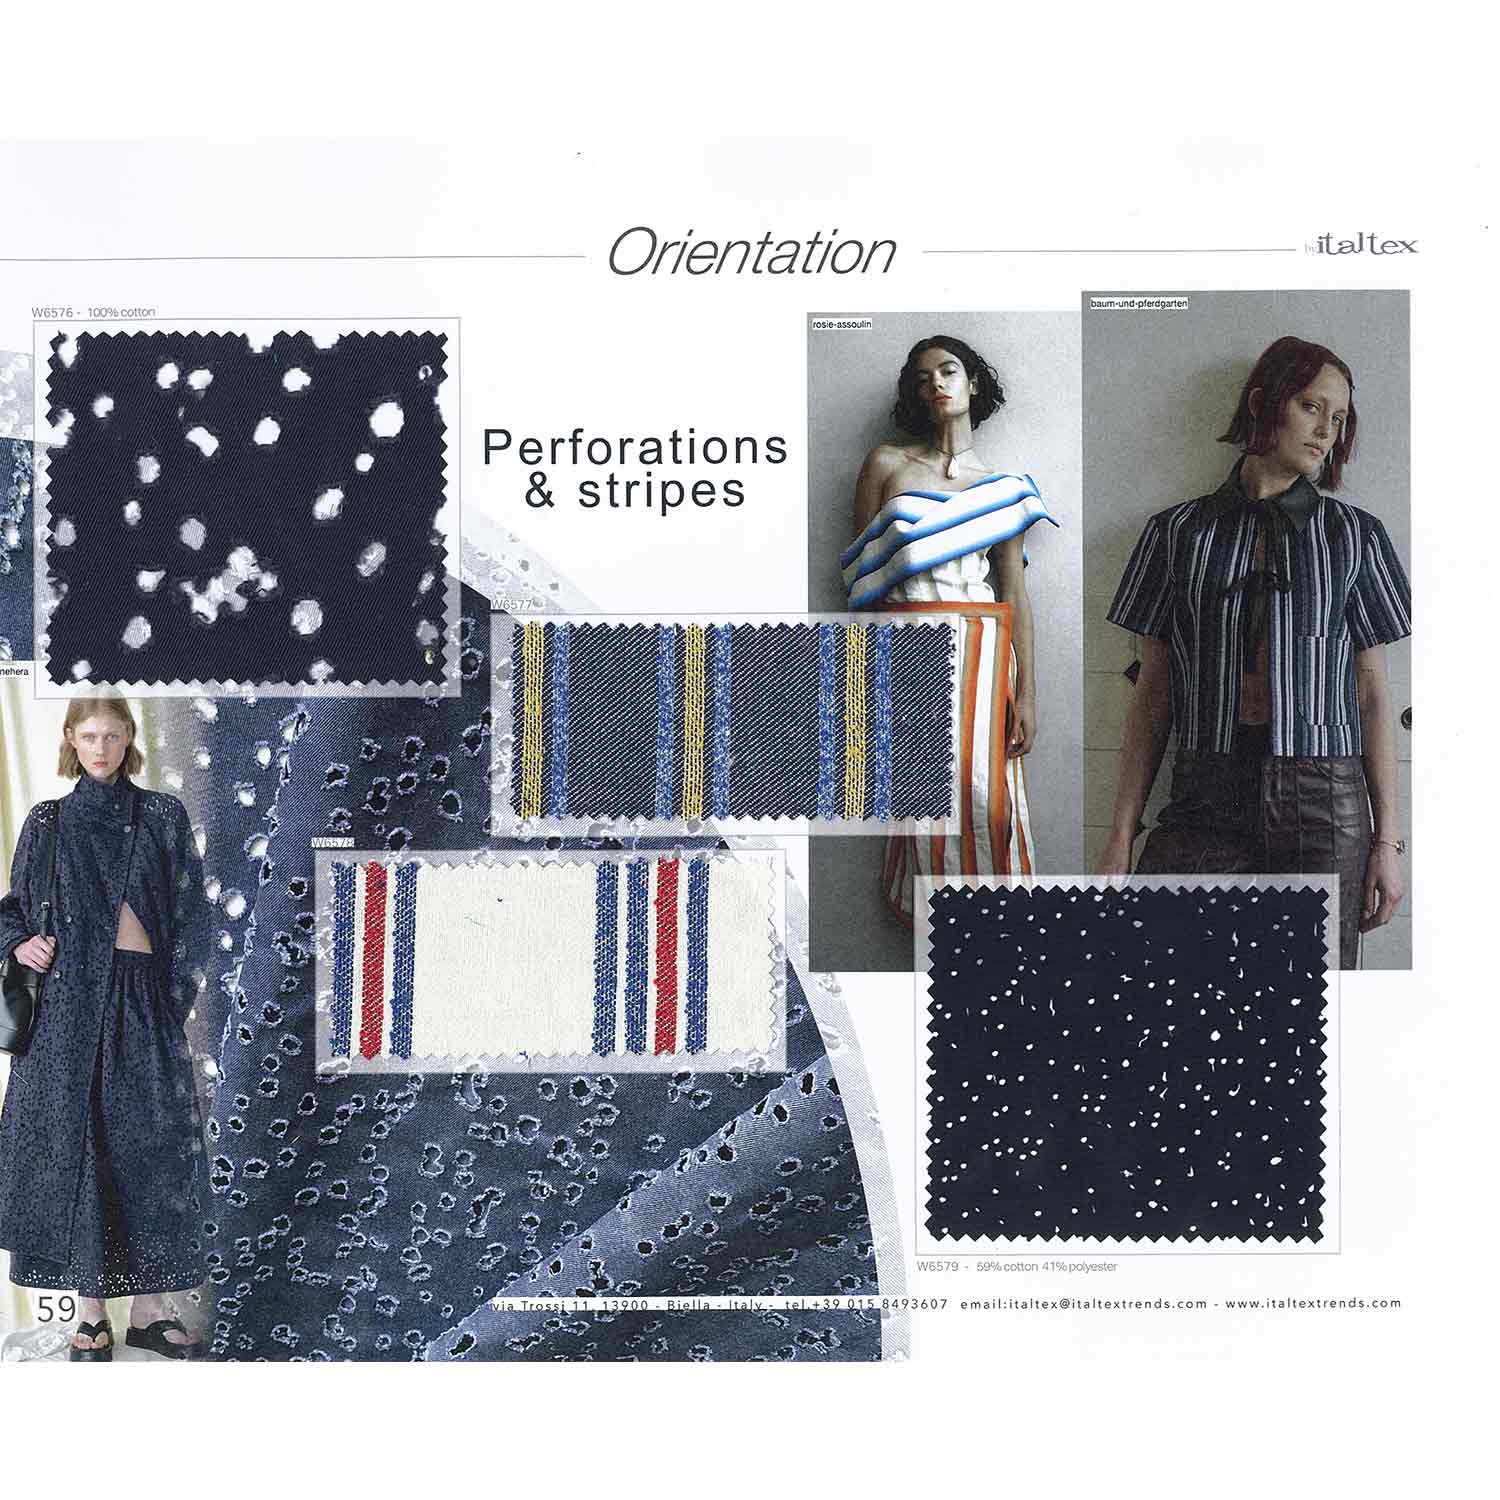 a page of the Italtex color and fabric trend forecast book Womenswear Spring Summer 2025. It shows four fabrics for denim look in regenerated cotton from old jeans saving cotton and allowing to avoid dyeing. One has laser perforations. One has a metallic laminated coating. One is an indigo and yellow striped pattern for dresses and shirts. One is a striped indigo and red pattern on a white background